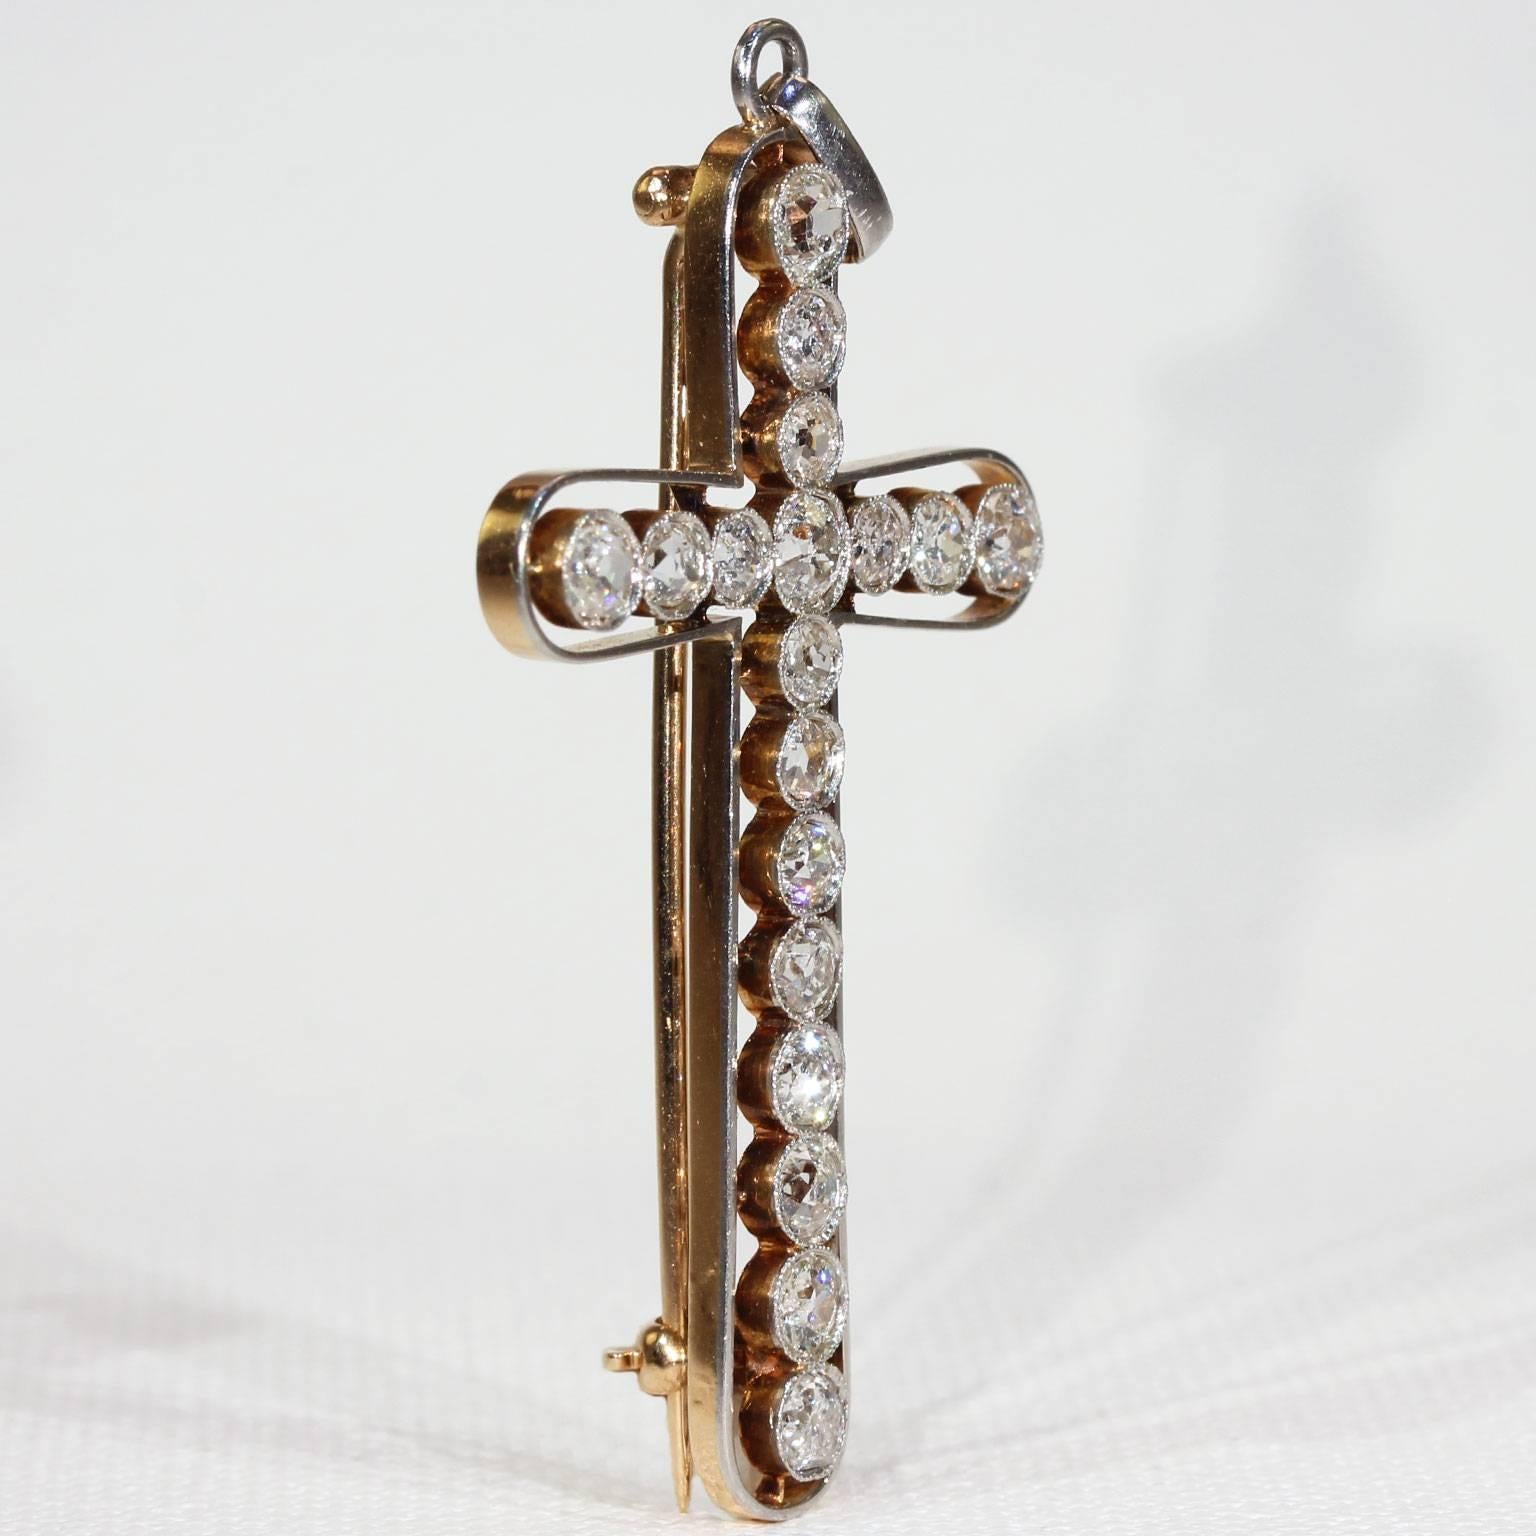 This lovely antique Edwardian diamond cross pendant was handcrafted around 1910. It has a brooch fitting, but we’d be happy to remove it upon request. There are 18 sparkling Old European cut diamonds totaling approximately 2.4 carats. Each stone is